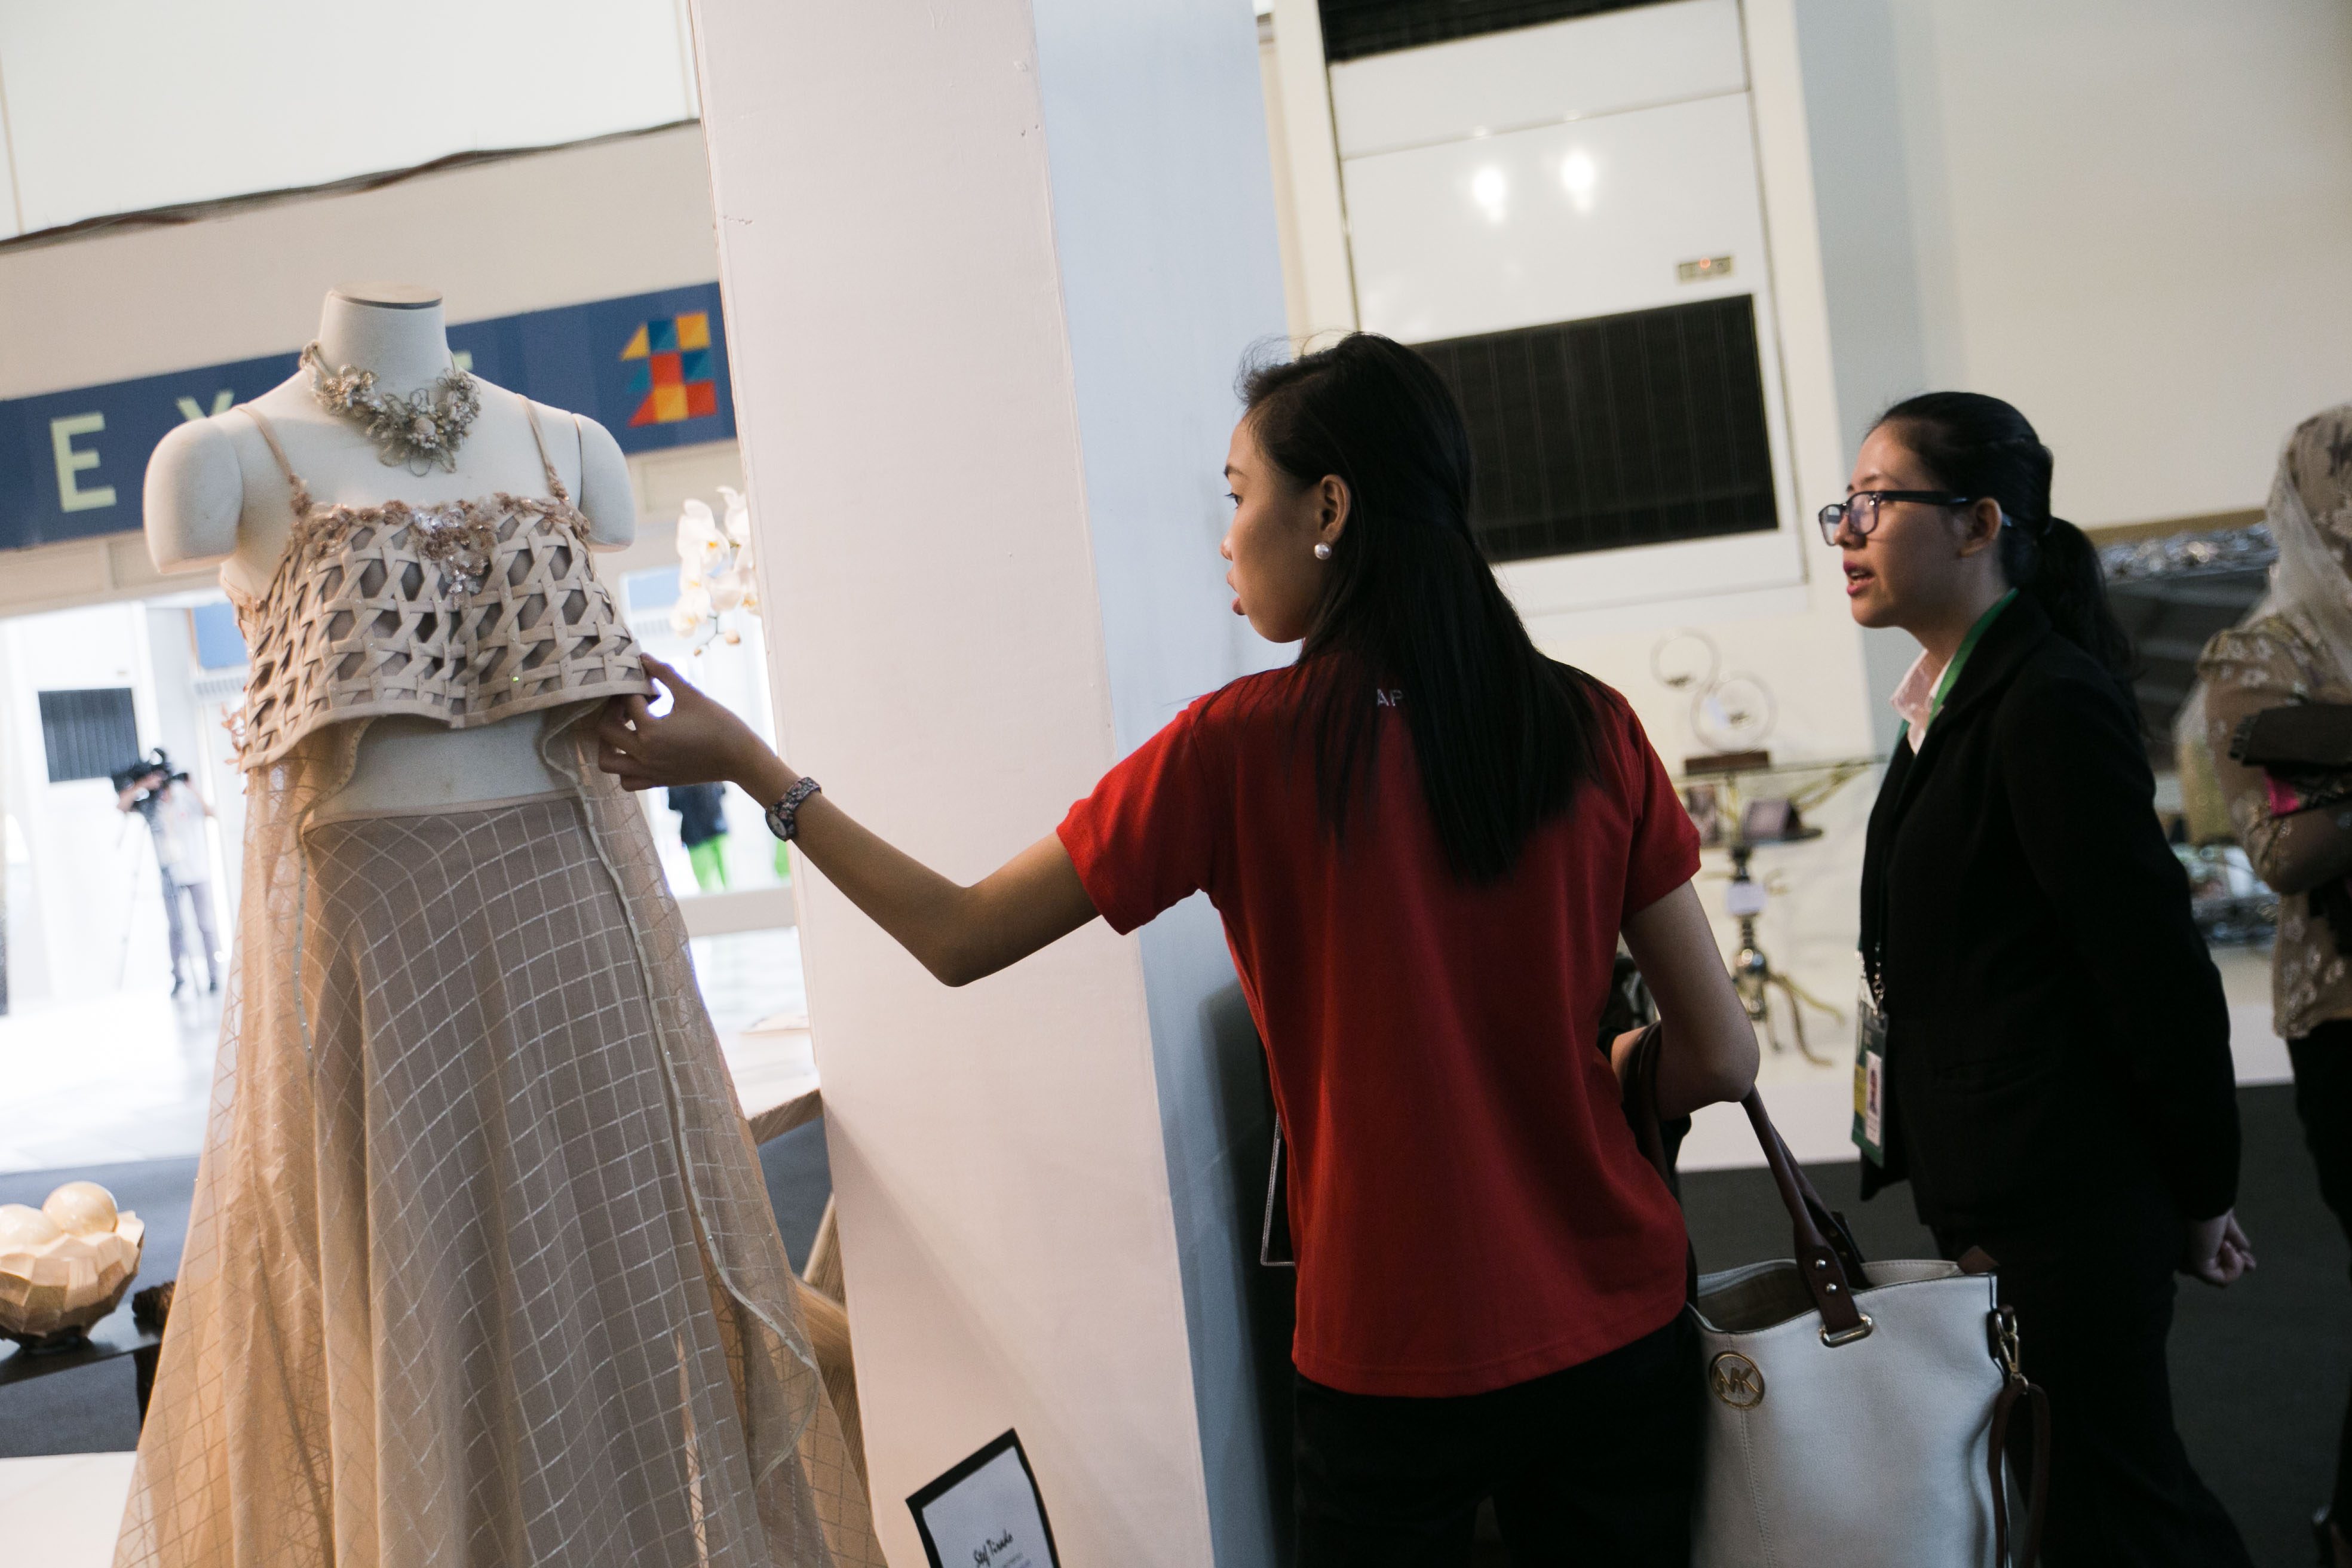 POTENTIAL BUYERS. Two women examine a gown that was exhibited by Expo Mandaue at the APEC International Media Center. Mandaue is a springboard of many businesses that hope to be and already are part of the export economy. Photo by Pat Nabong/Rappler